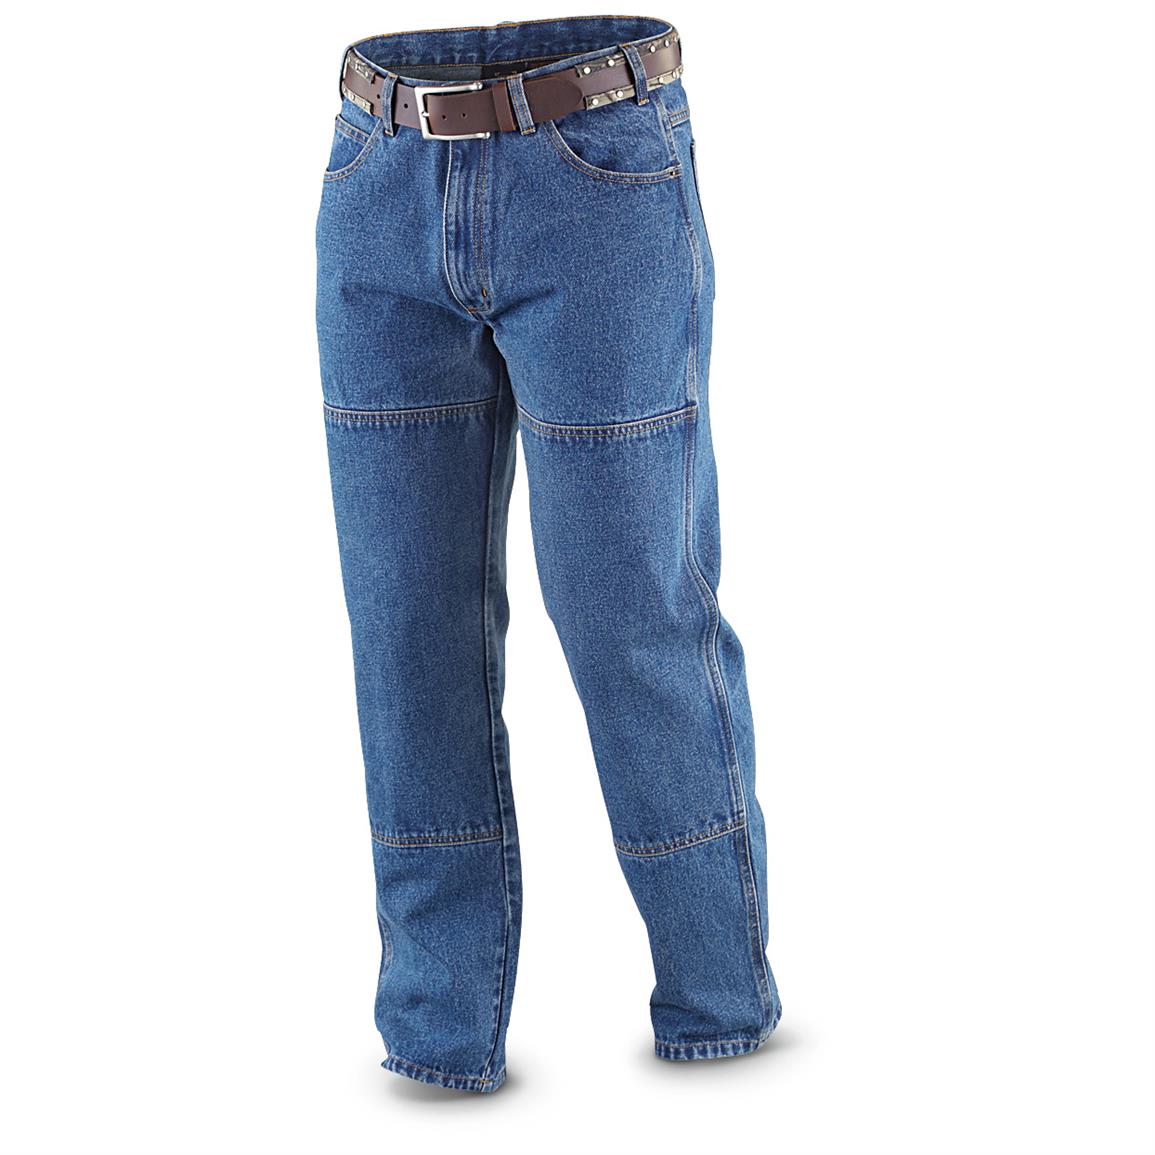 Guide Gear 1977 Men's Stone Washed Jeans with Cell Phone Pocket ...